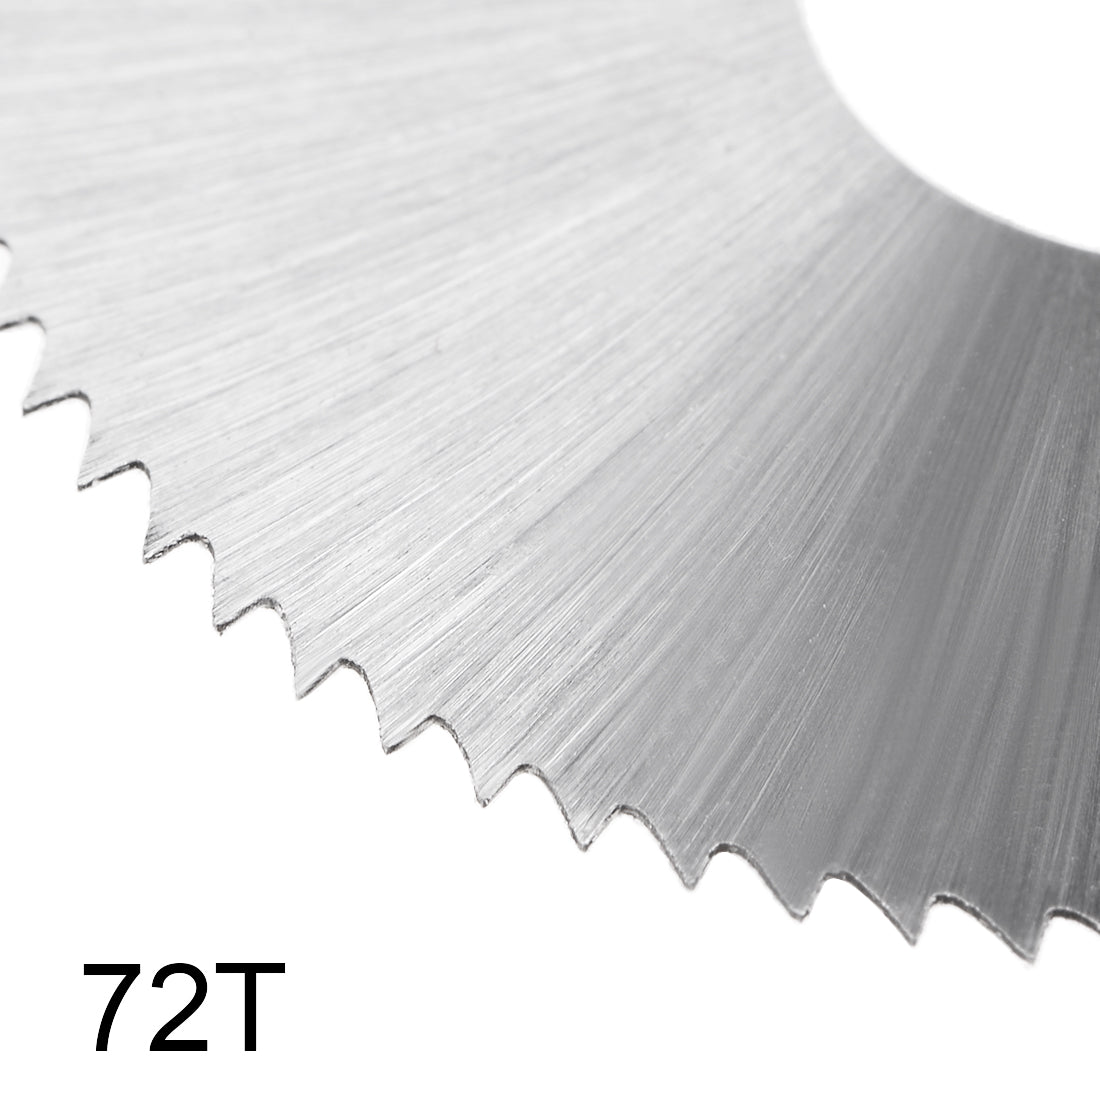 Uxcell Uxcell HSS Saw Blade, 40mm 72 Tooth Circular Cutting Wheel 2.5mm Thick w 13mm Arbor